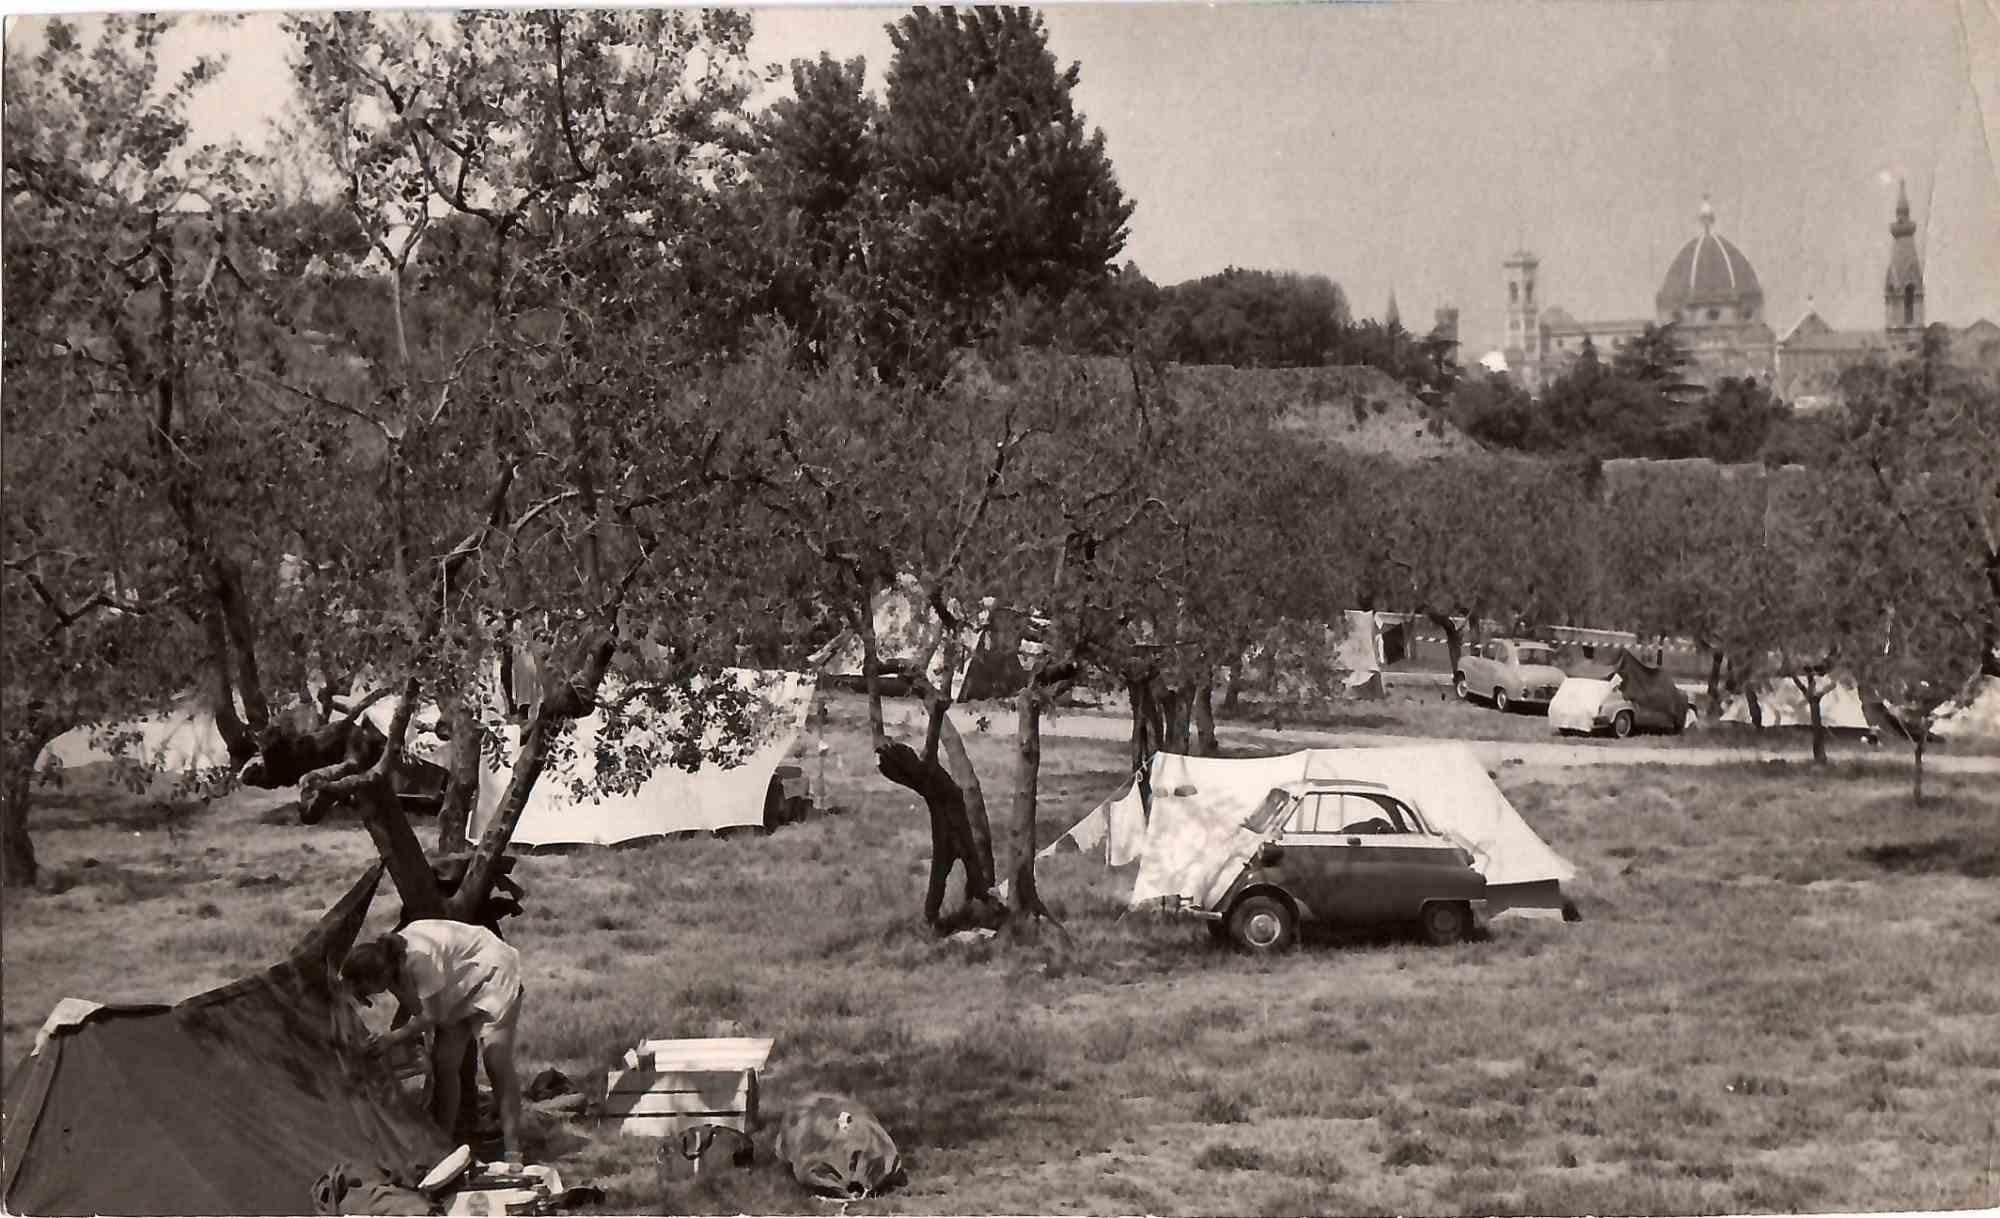 Camping in the 1960s - Vintage Photograph - 1960s